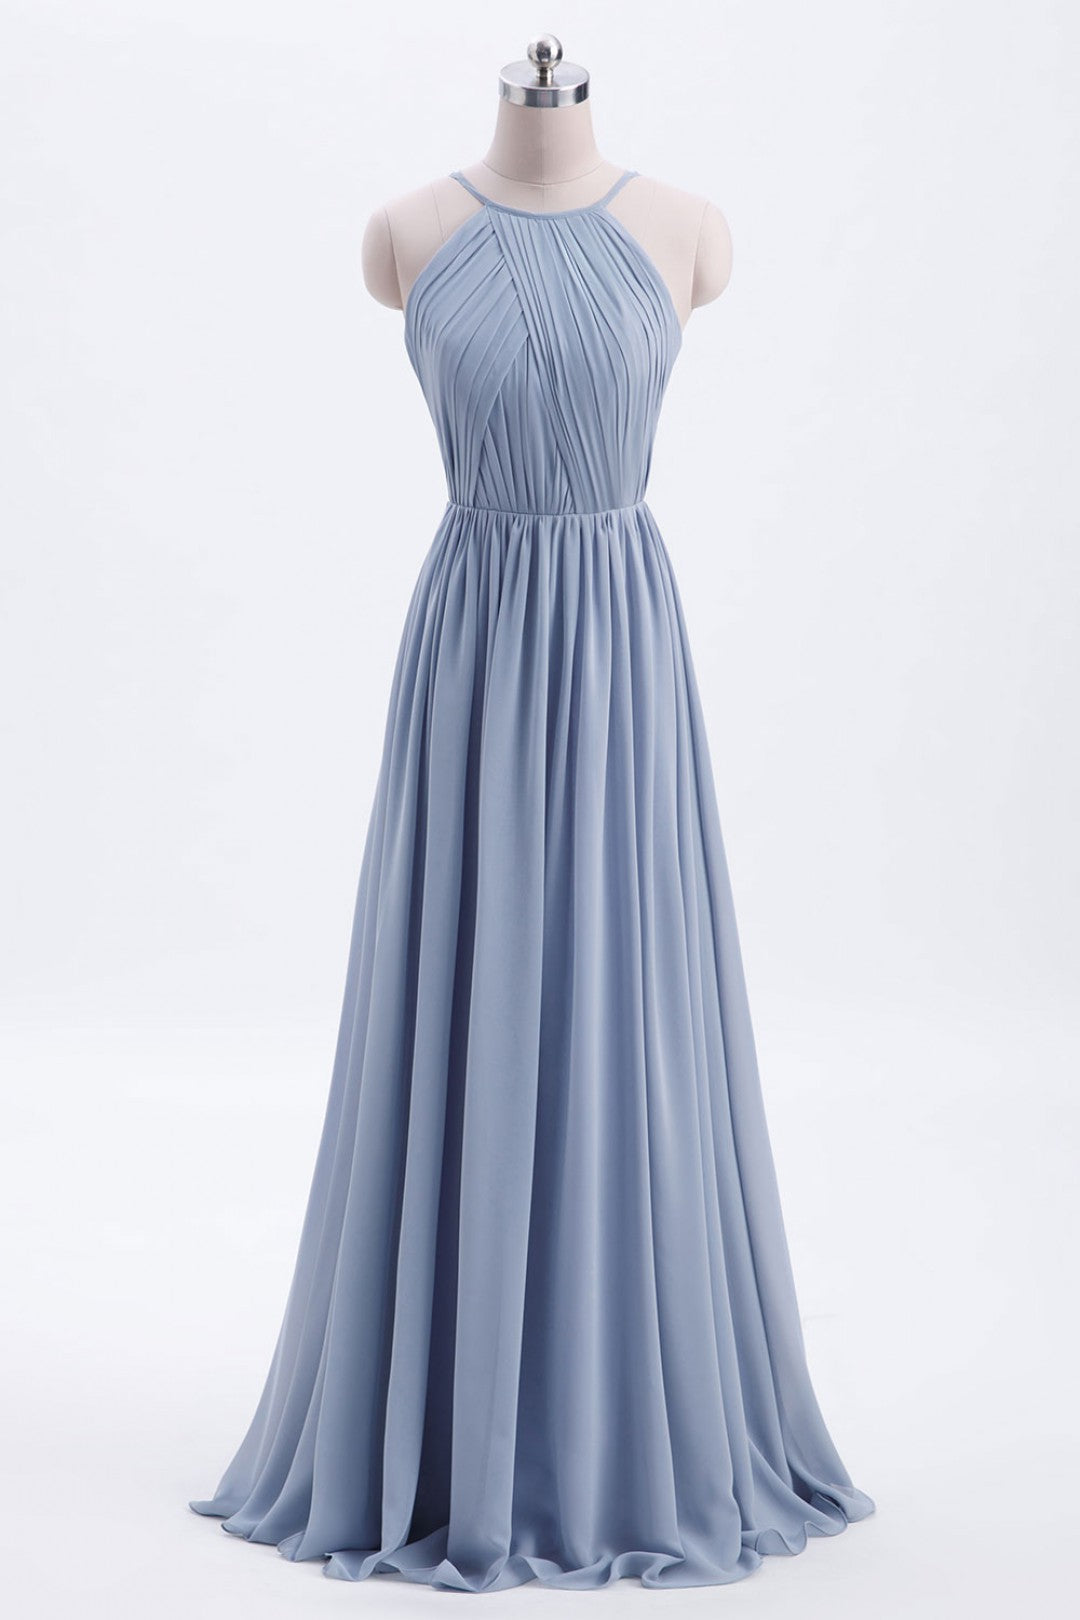 Prom Dresses For Girl, Misty Blue Scoop Chiffon A-line Long Bridesmaid Dress